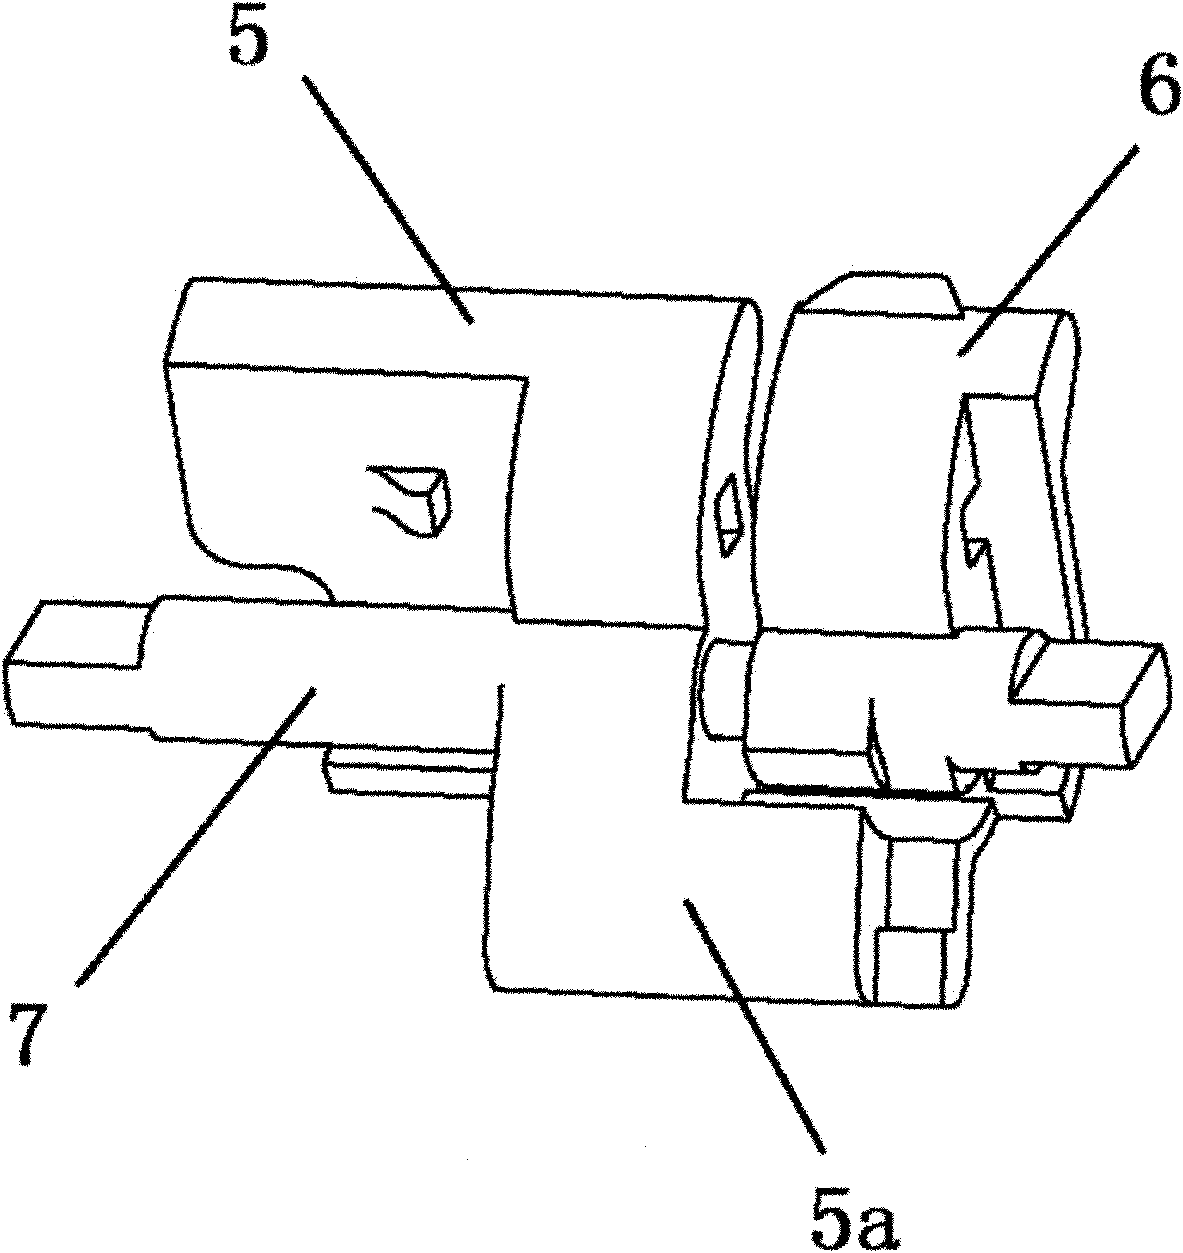 Operating mechanism of selective protection switch